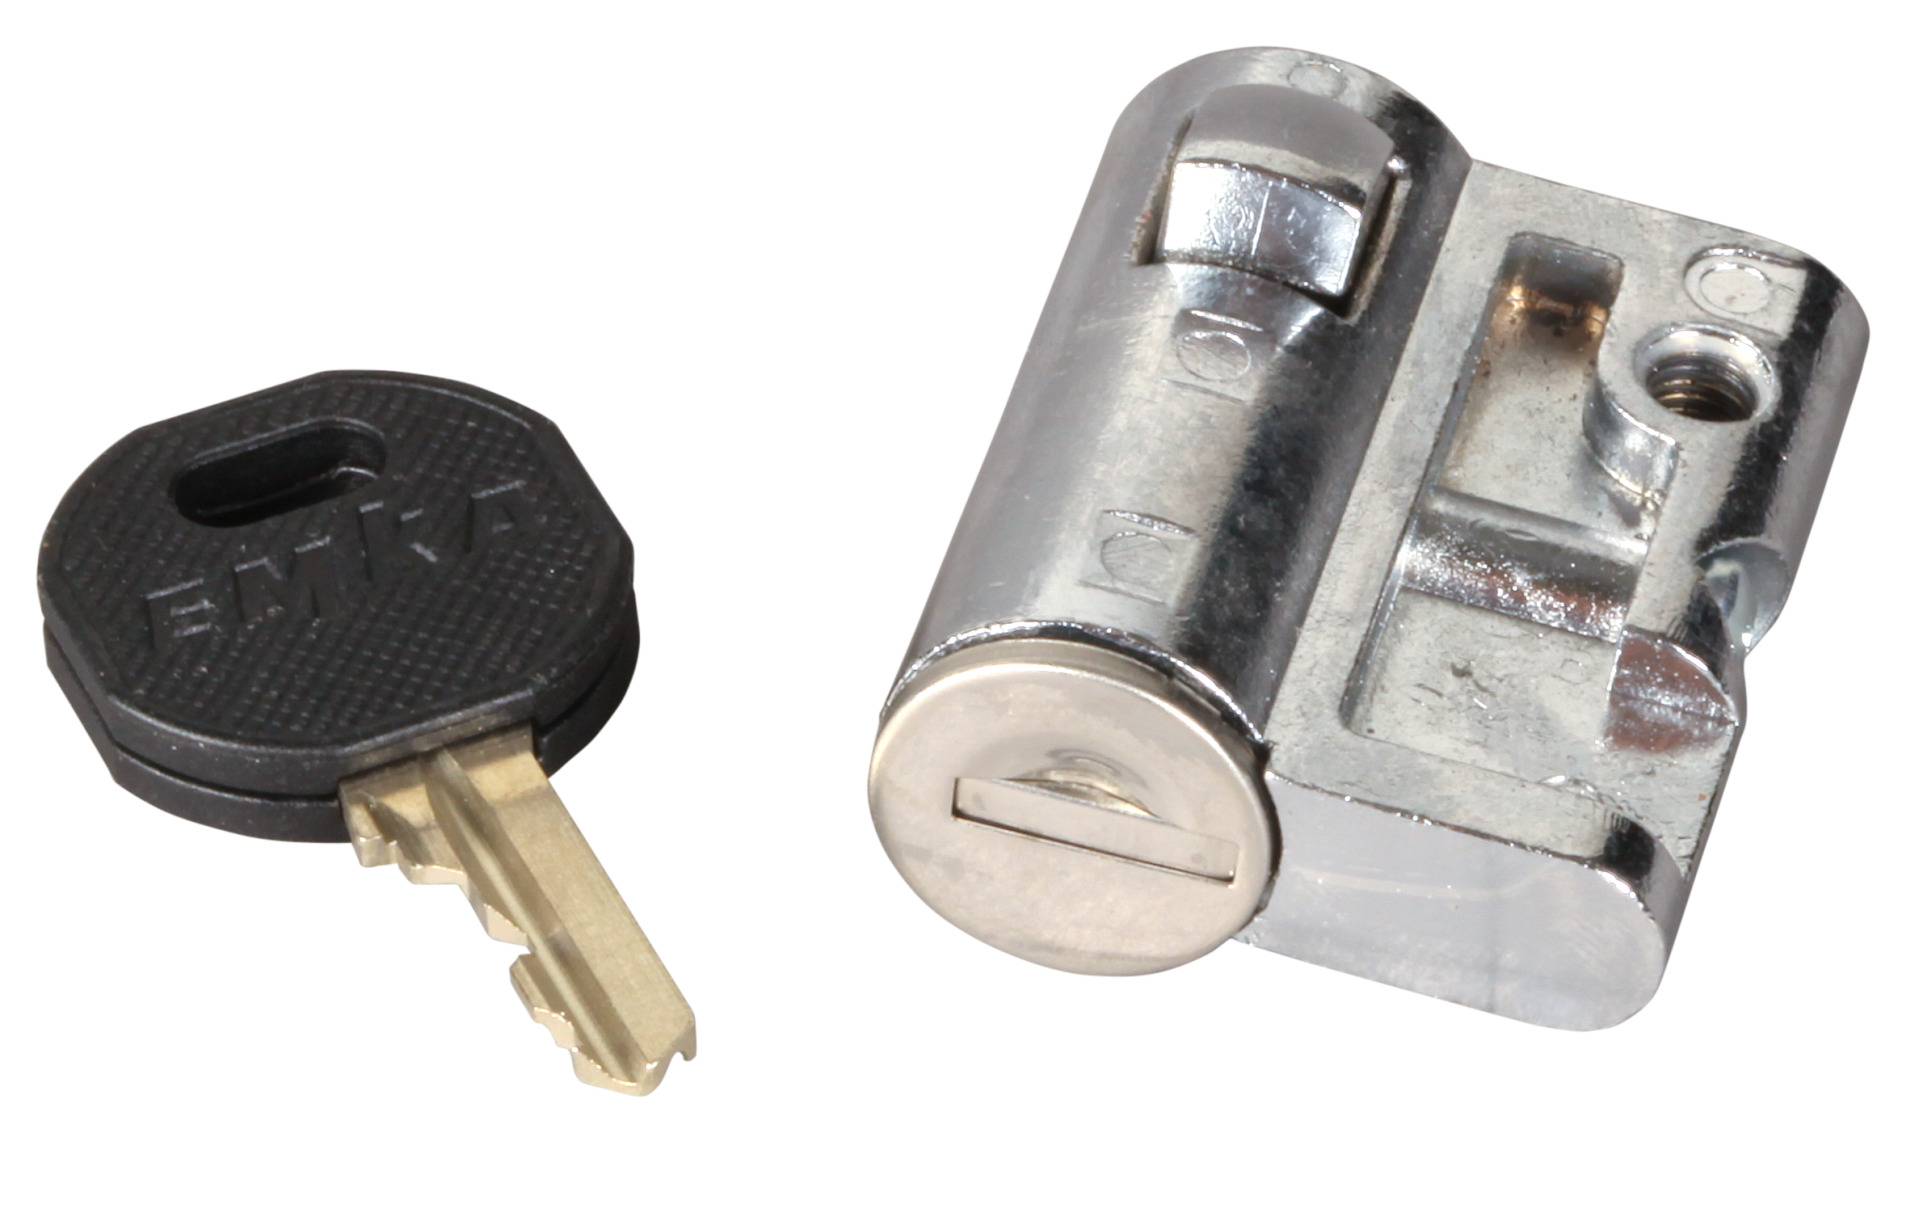 Profile Half-Cylinder for Locking 3524E with 1 Key